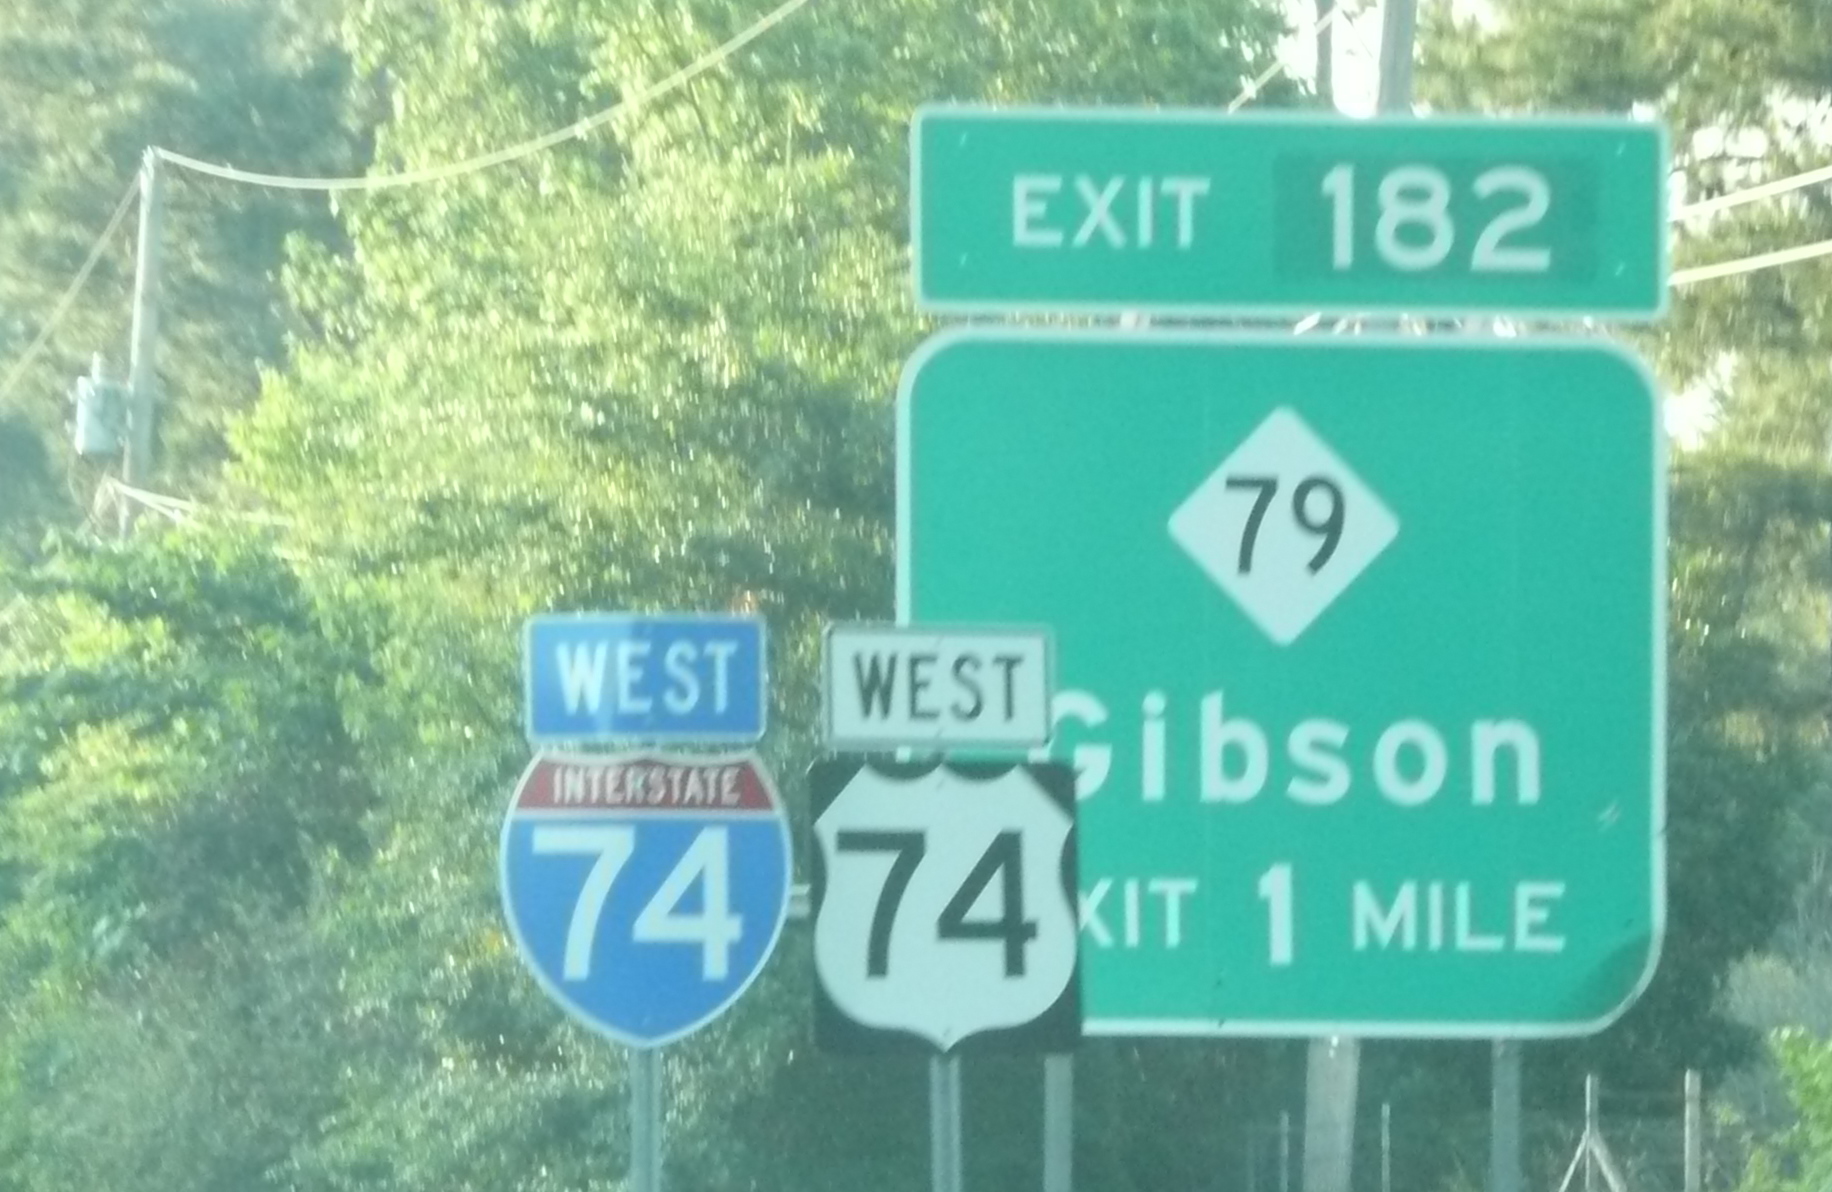 Photo of exit signage for NC 79 along then I-74 in May 2009, Courtesy of 
James Mast